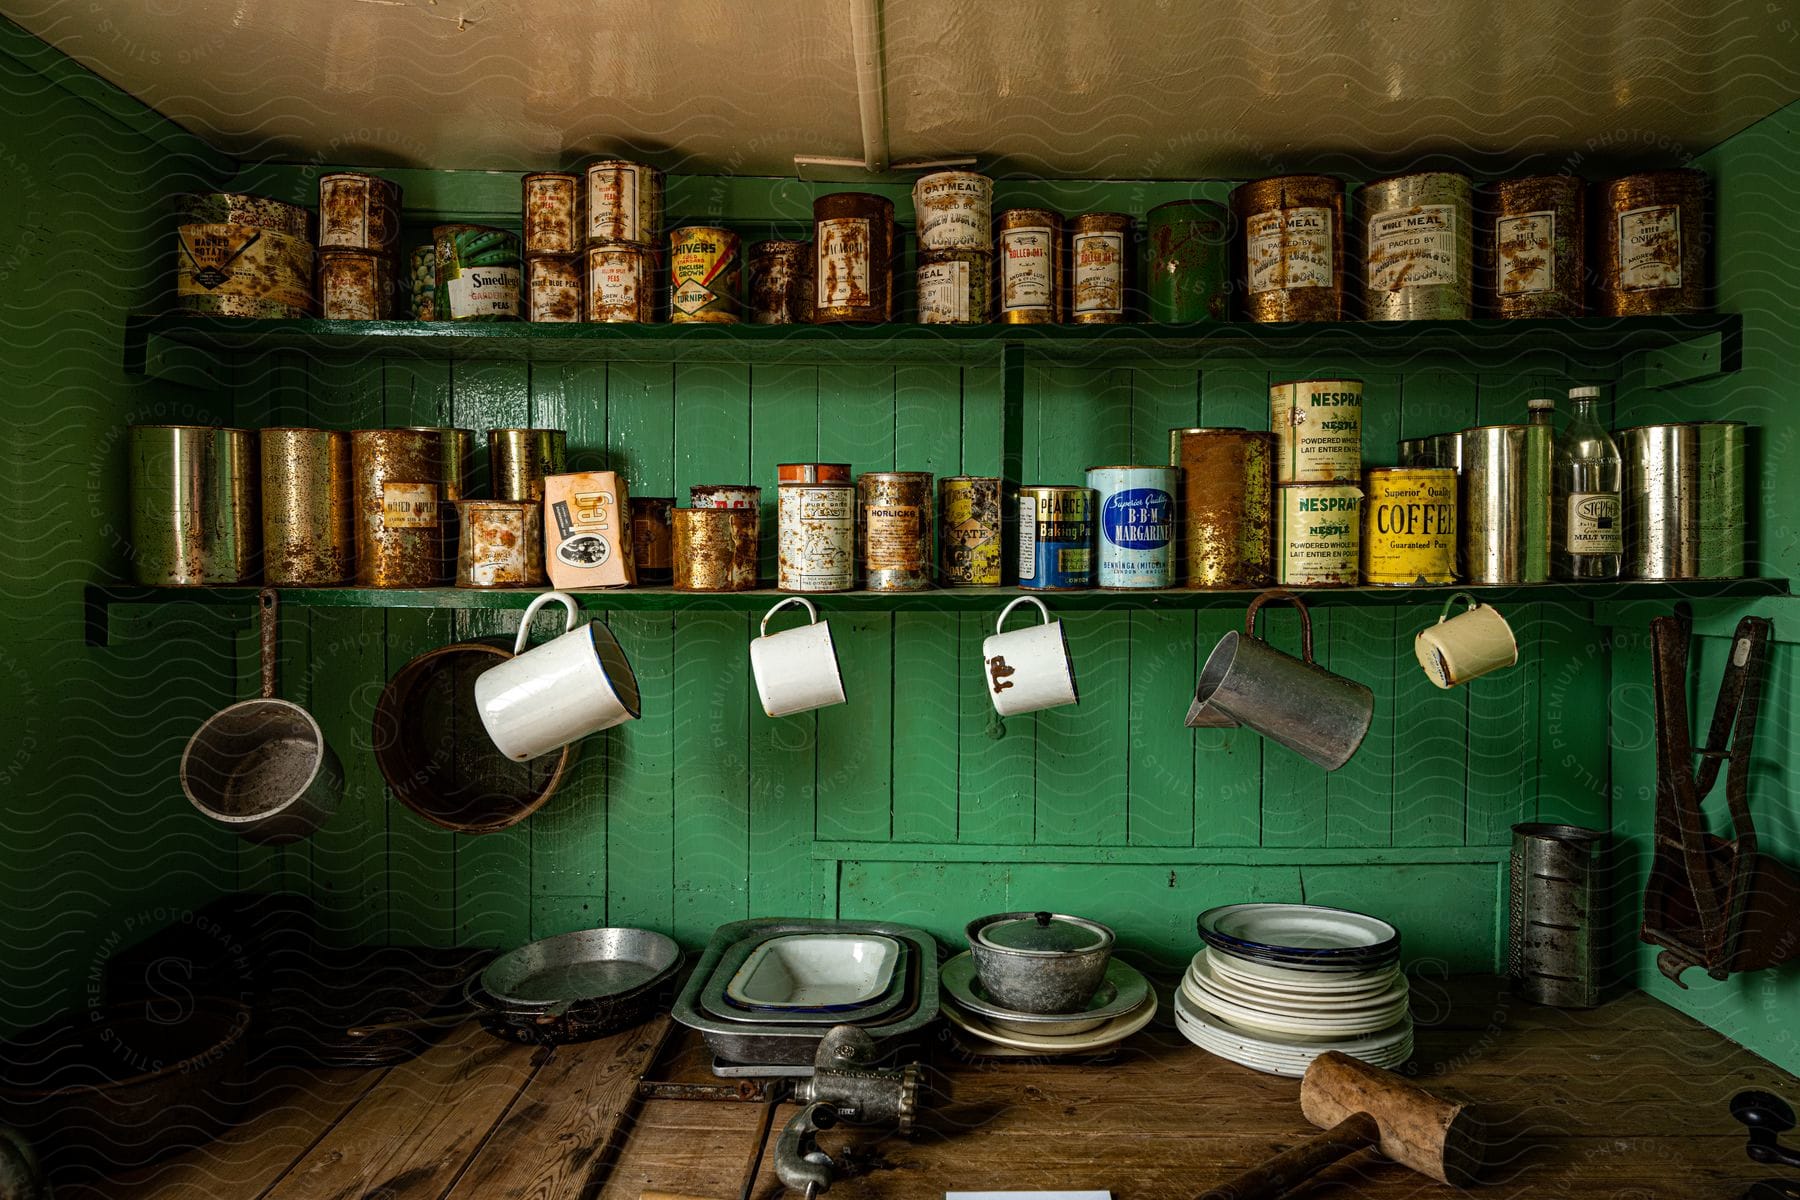 Vintage coffee cans on shelves in a green room with vintage cookware on a wooden counter